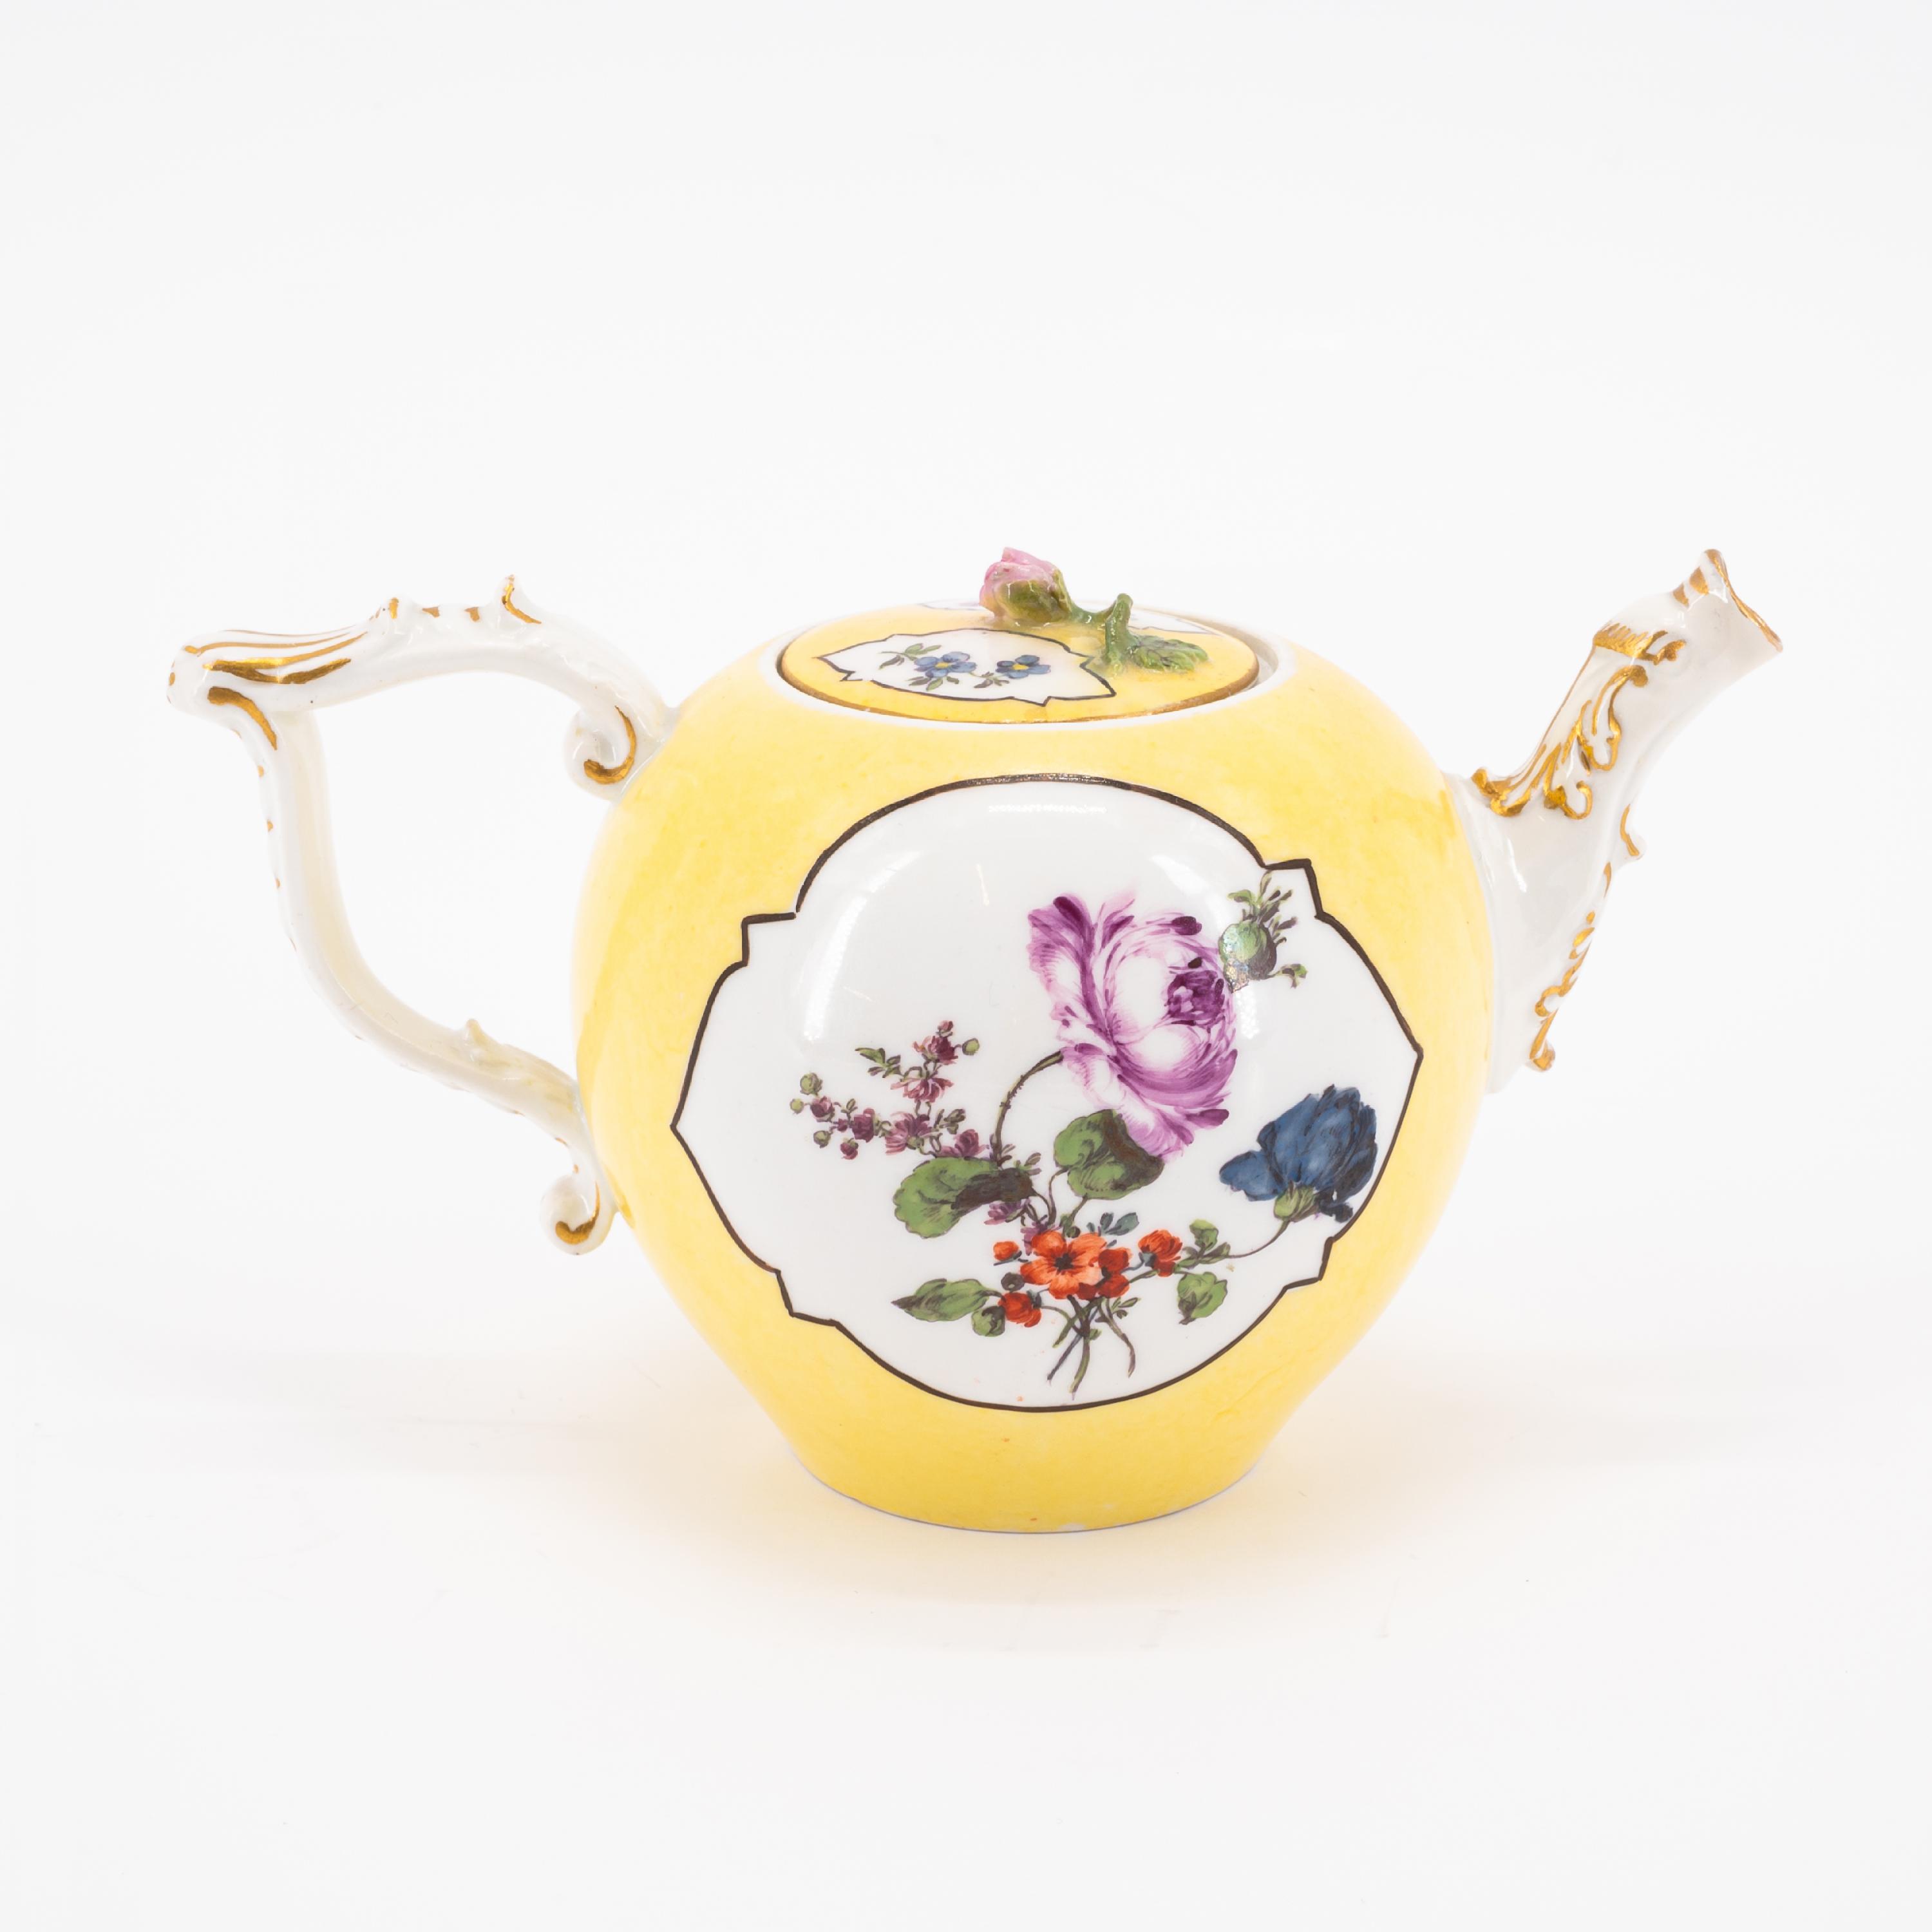 PORCELAIN TEA POT, TWO CUPS AND SAUCERS WITH YELLOW GROUND AND OMBRÉ FLORAL PAINTING - Image 8 of 11